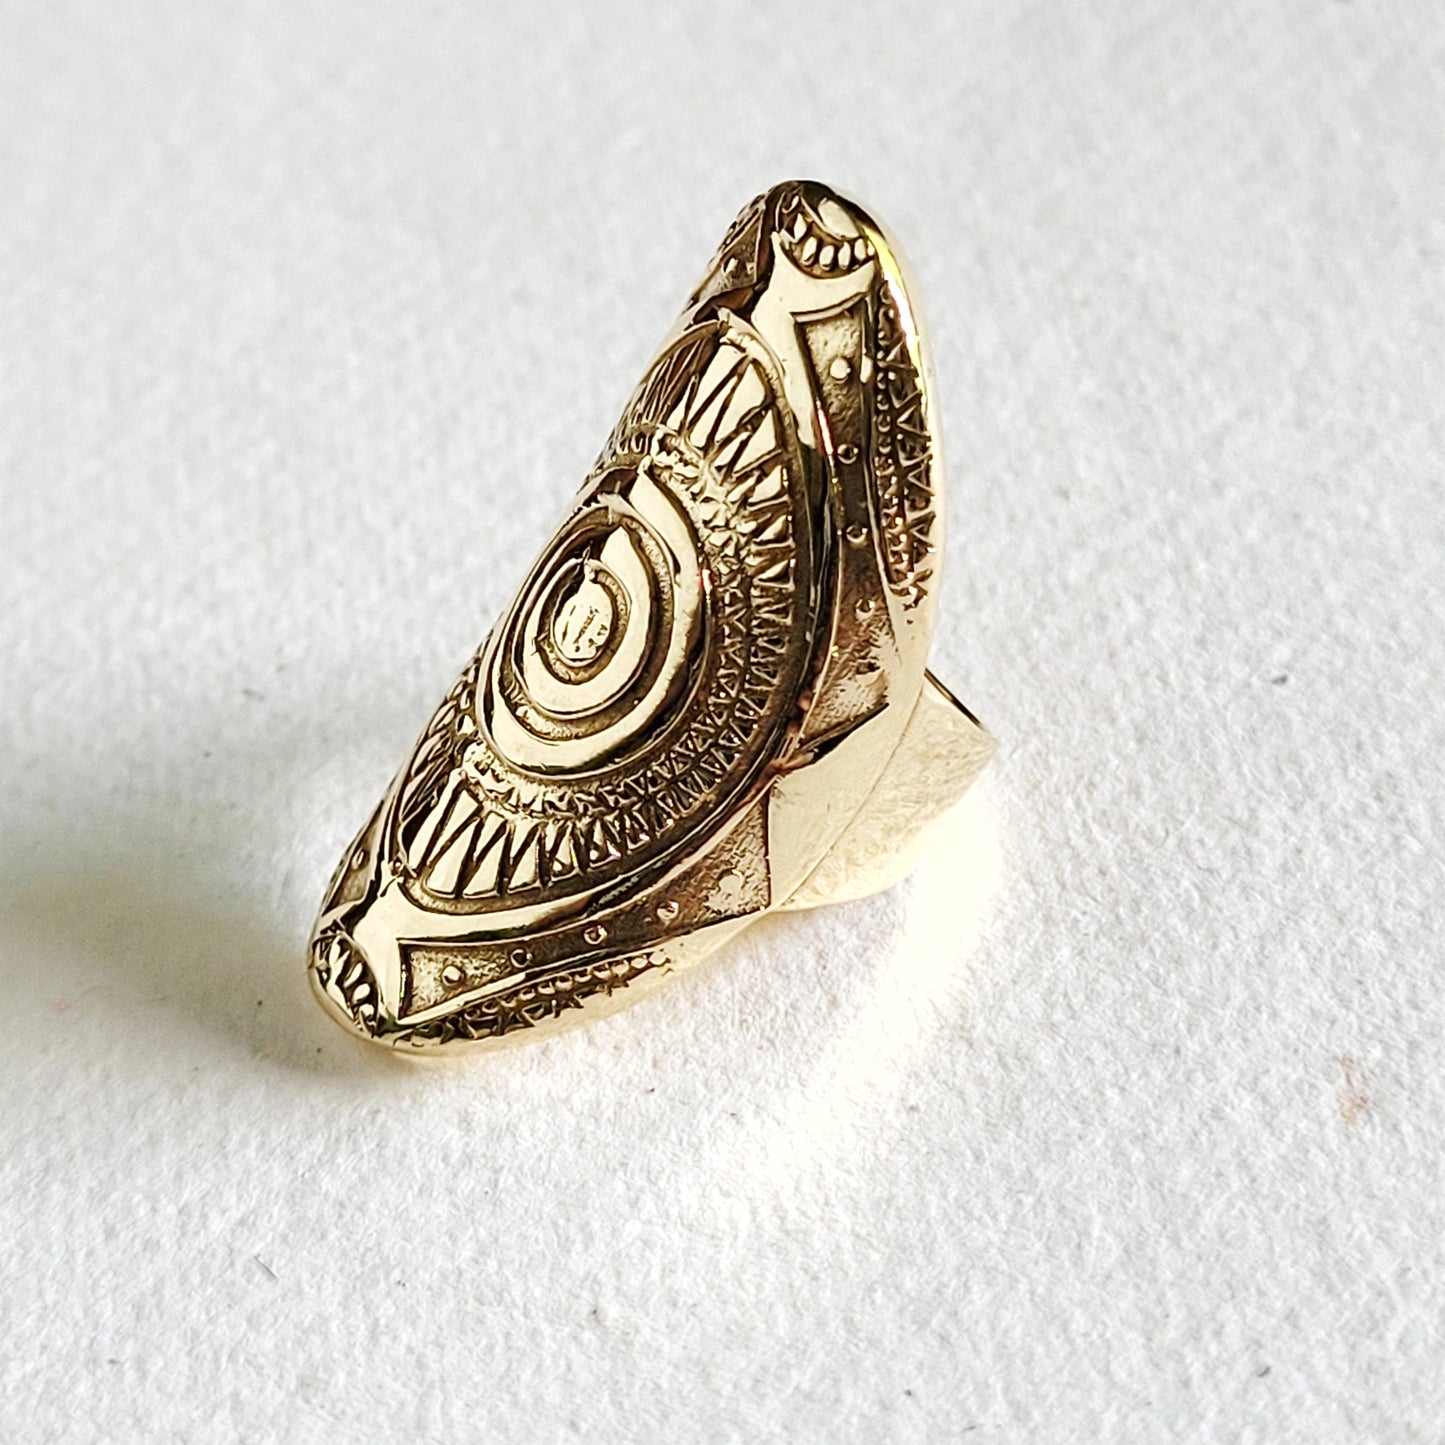 Brass Ornate Sun Band Ring Handcrafted Tribal Ethnic - Moon Room Shop and Wellness